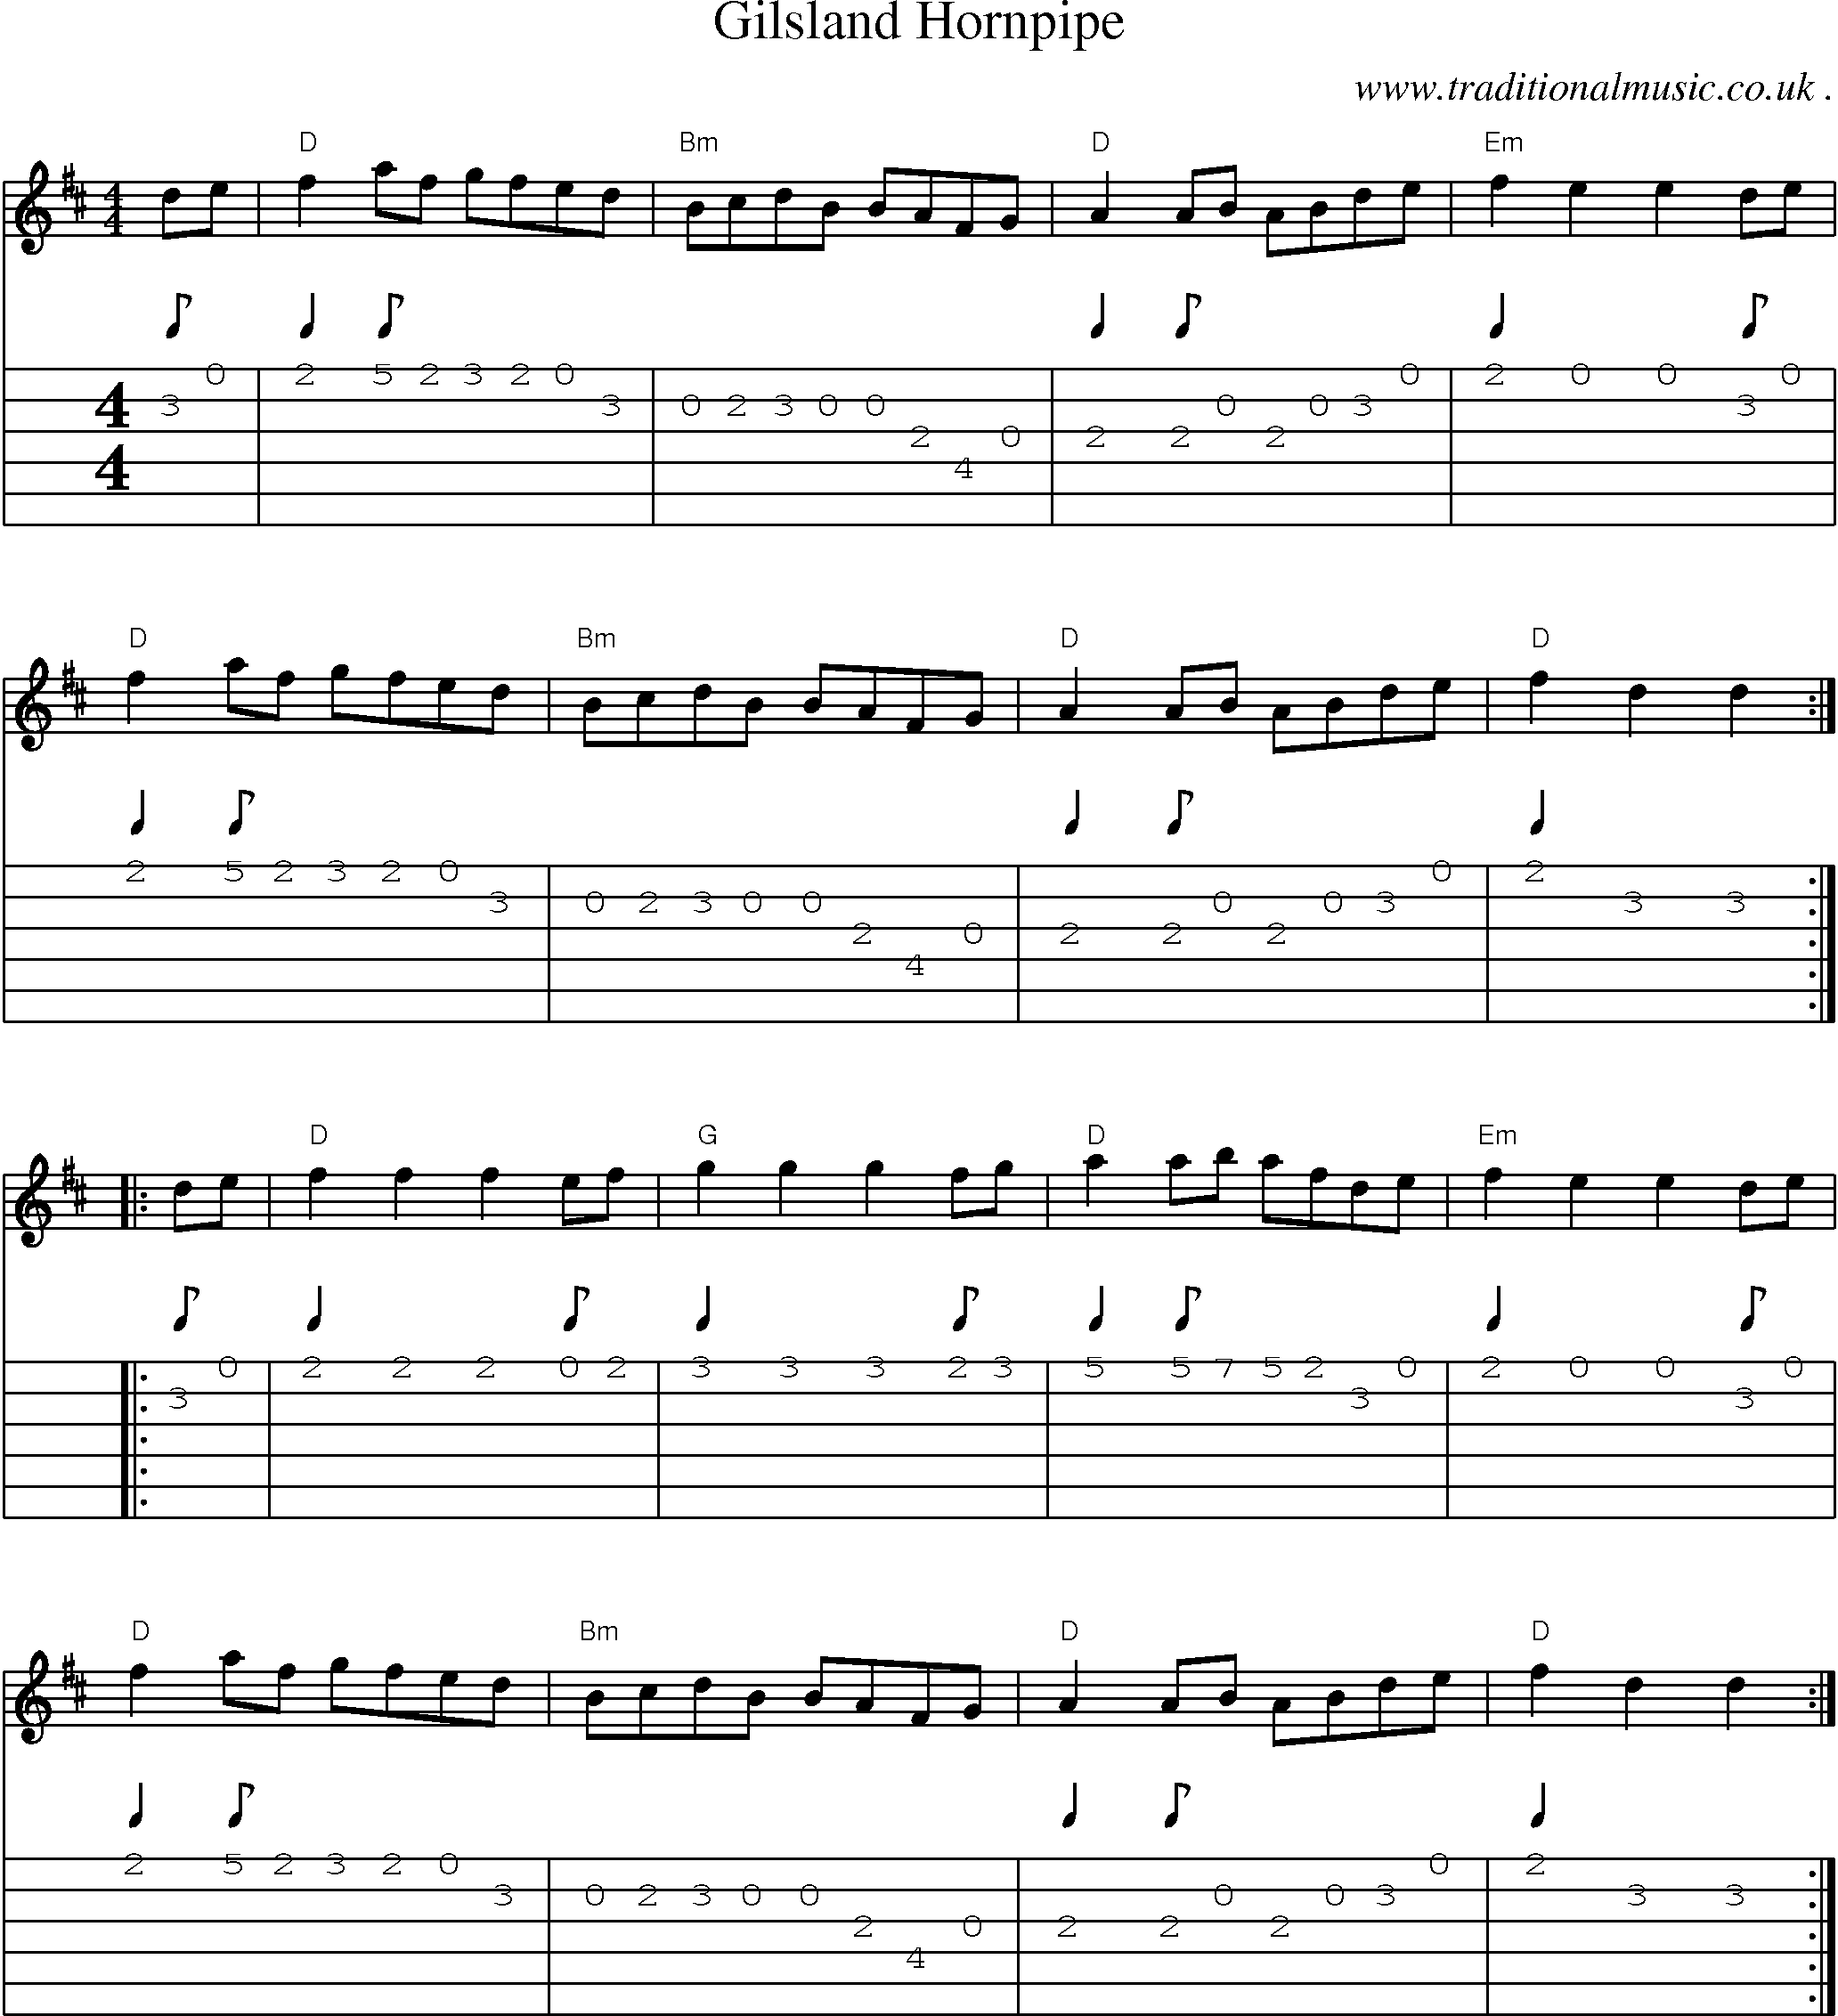 Music Score and Guitar Tabs for Gilsland Hornpipe